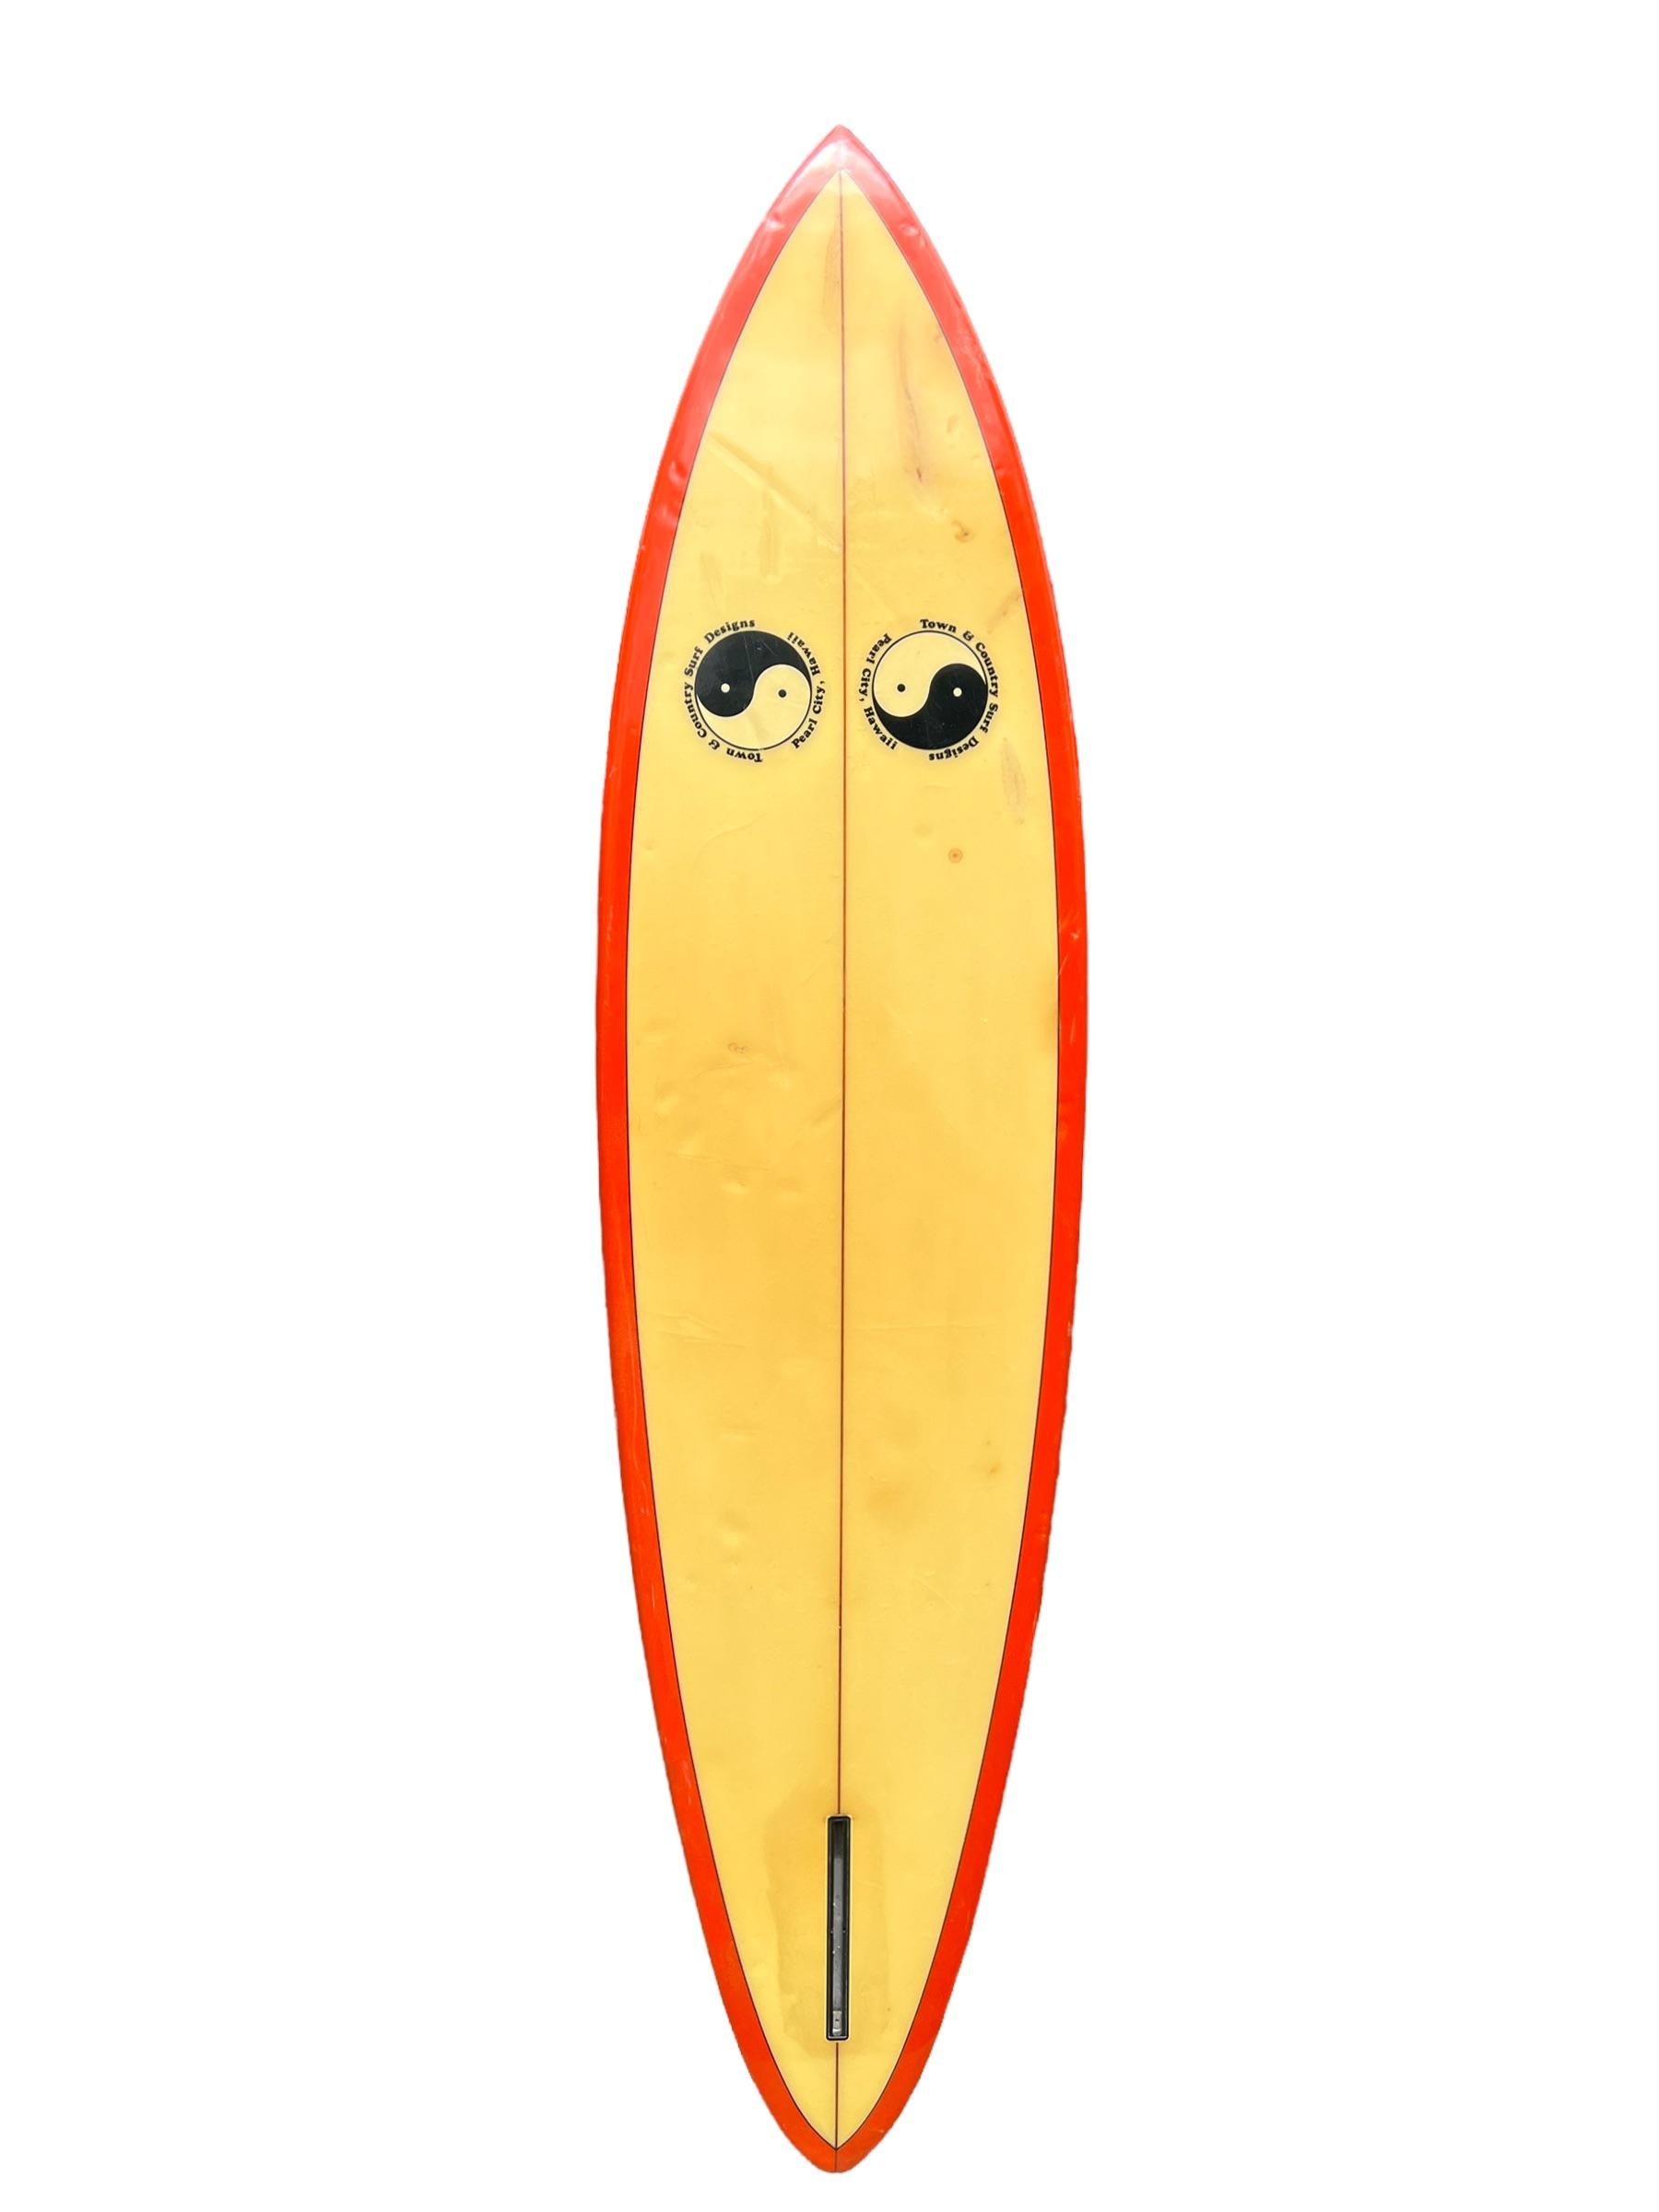 1979 Town & Country surfboard made by Ed Angulo. Features a gorgeous red tinted deck/rails with dual T&C laminates and boxed single fin setup. A remarkable example of a 1970s surfboard made under the iconic Town and Country surfboards label.

Town &